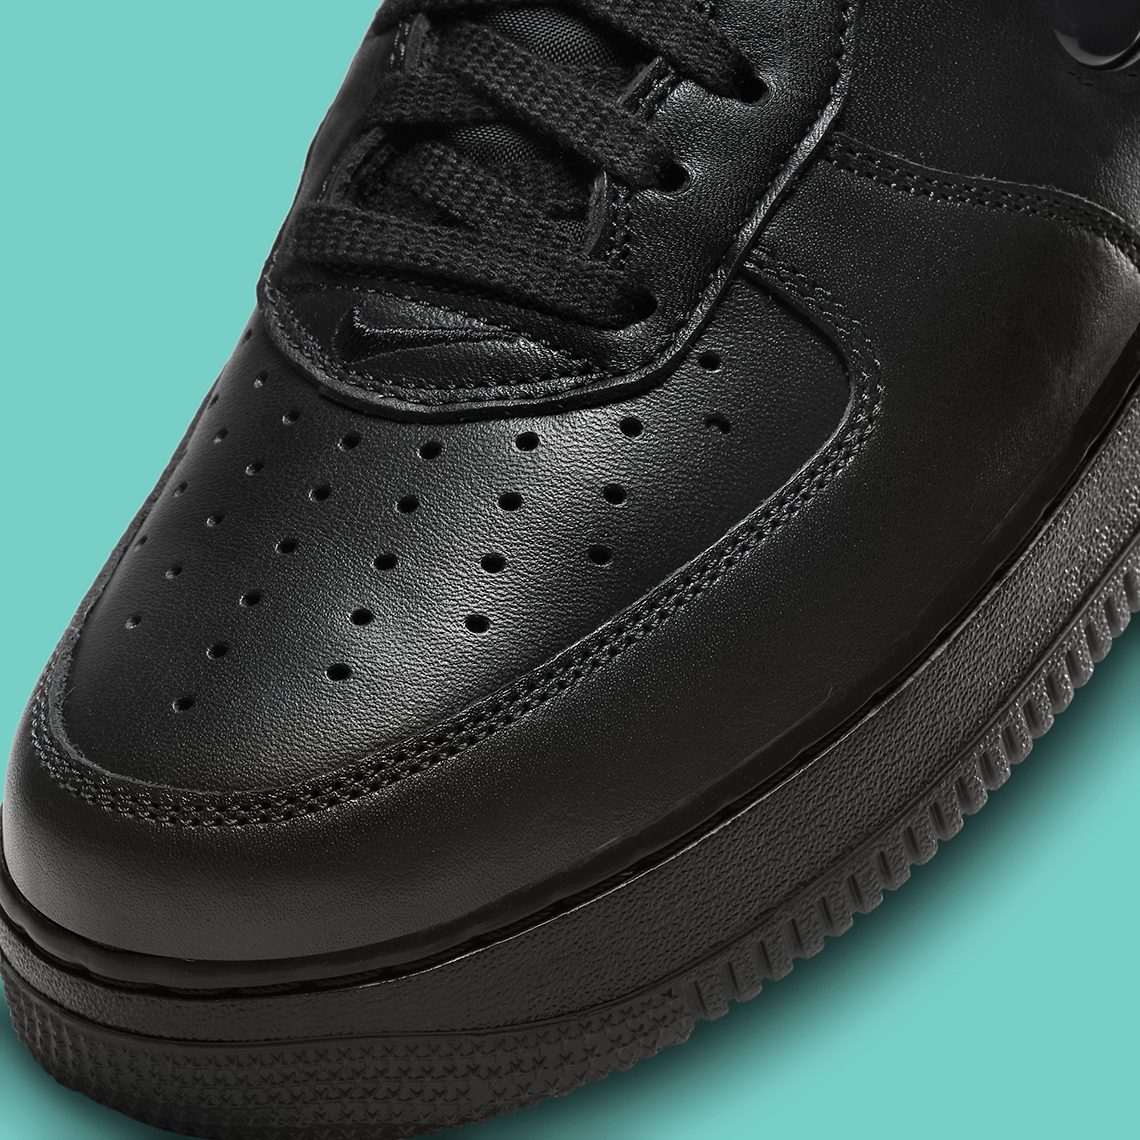 Nike Air Force 1 Low Color Of The Month Black Fn5924 001 9